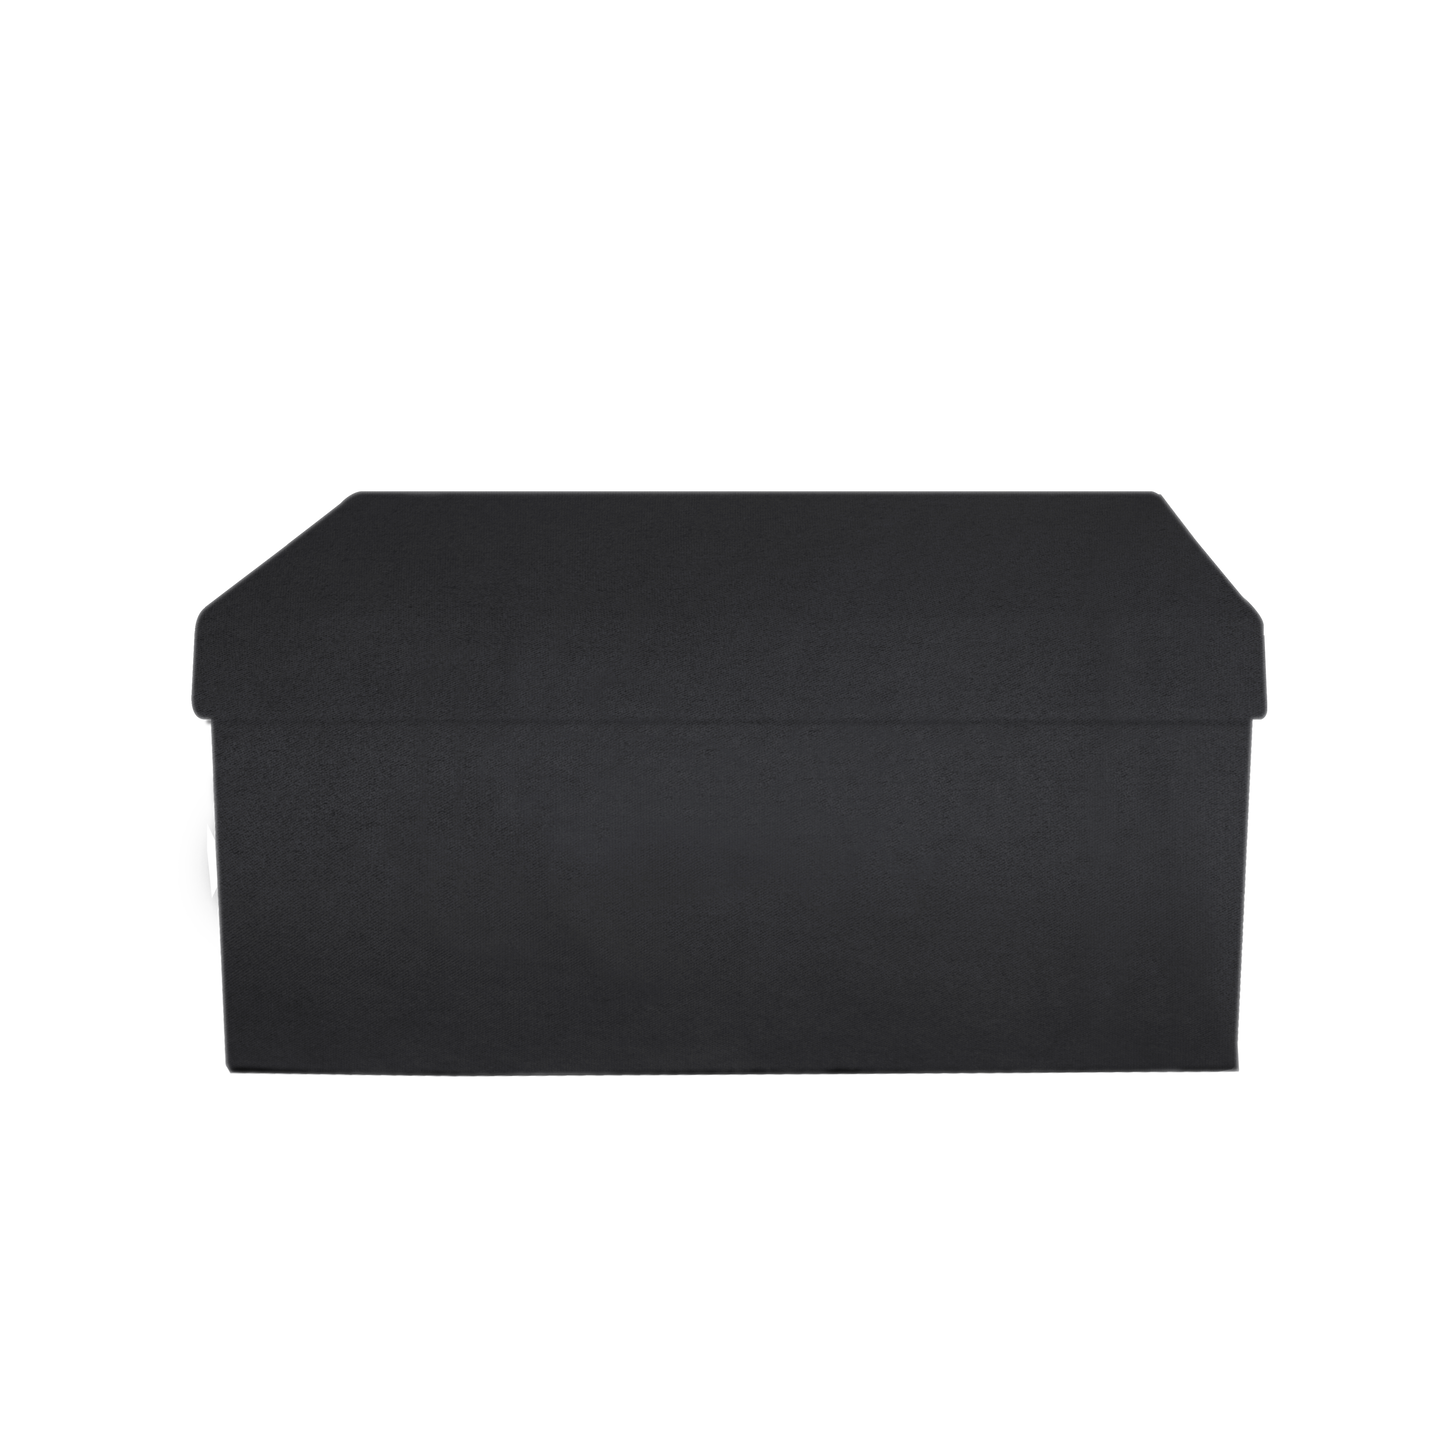 Kit 3 different sizes rectangular shape boxes 3 in 1 - Suede Black